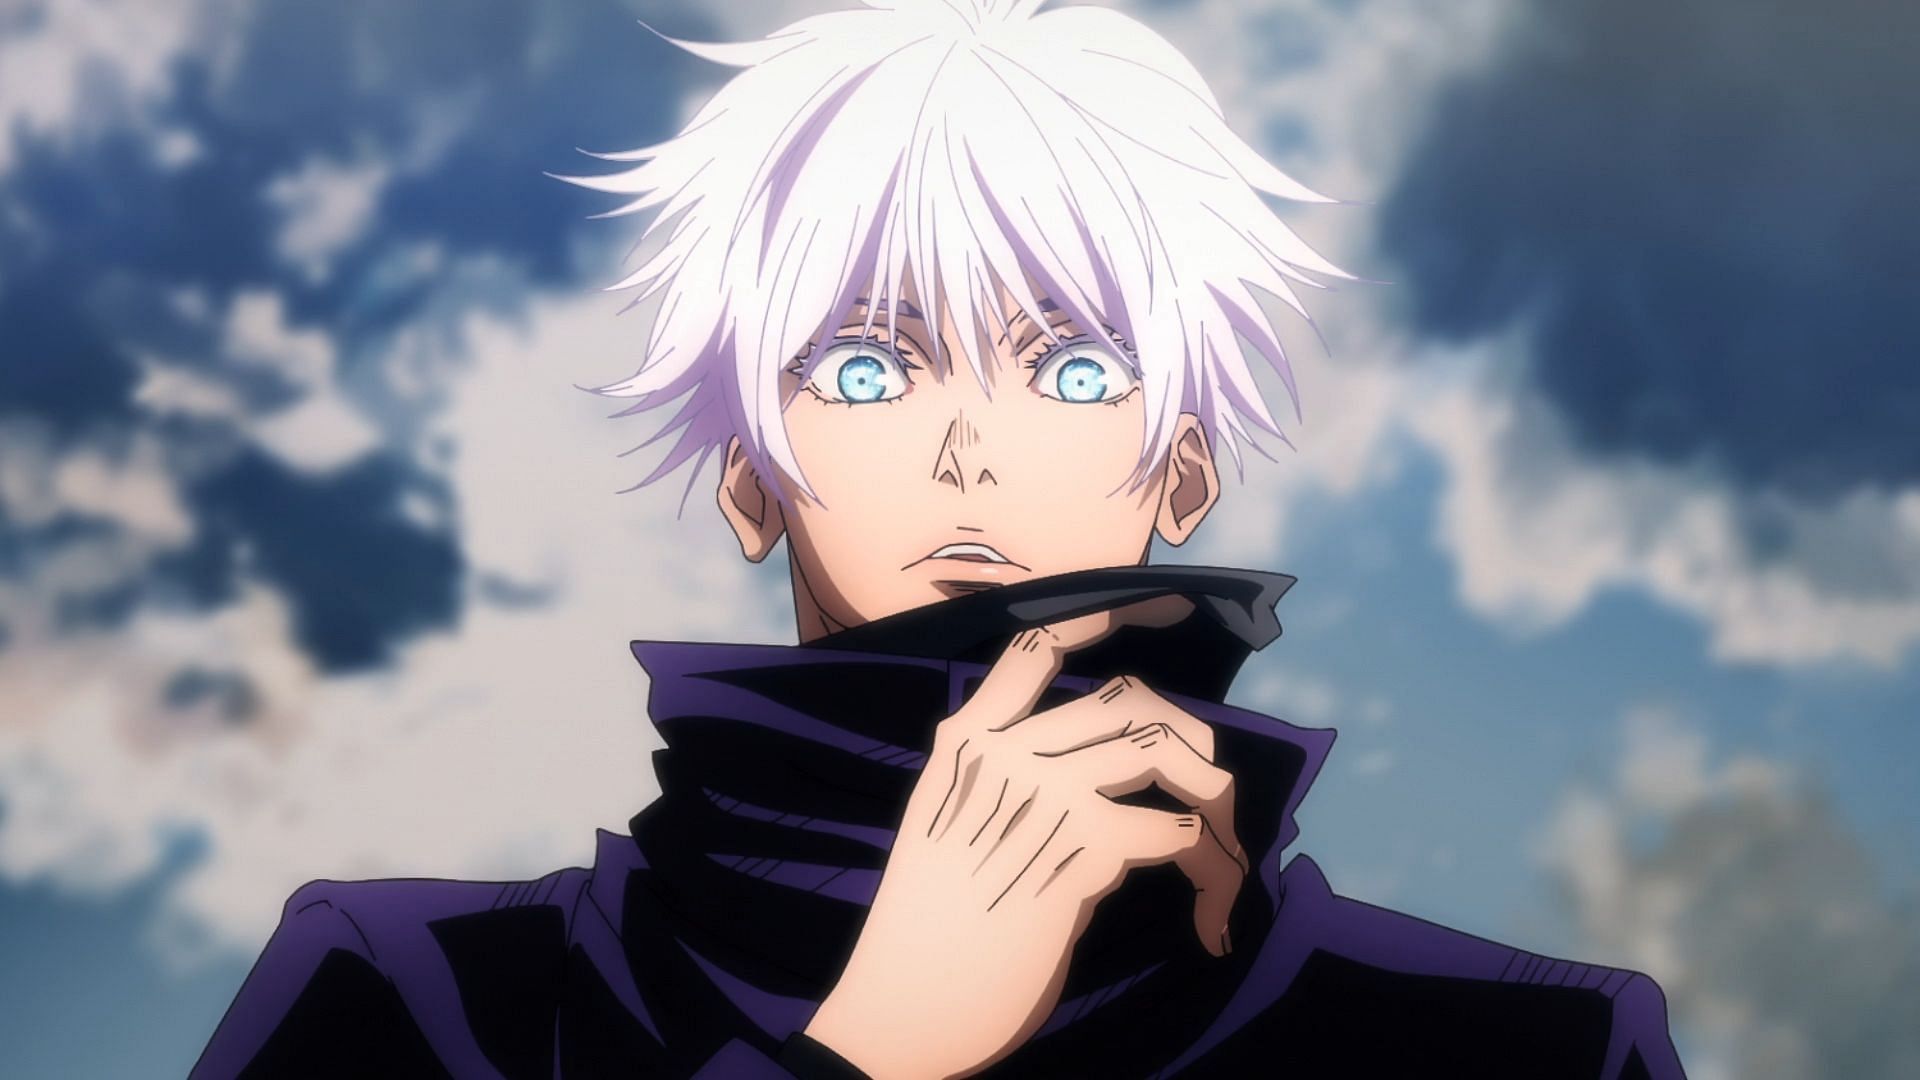 10 Smartest Anime Characters Ranked According To IQ Level